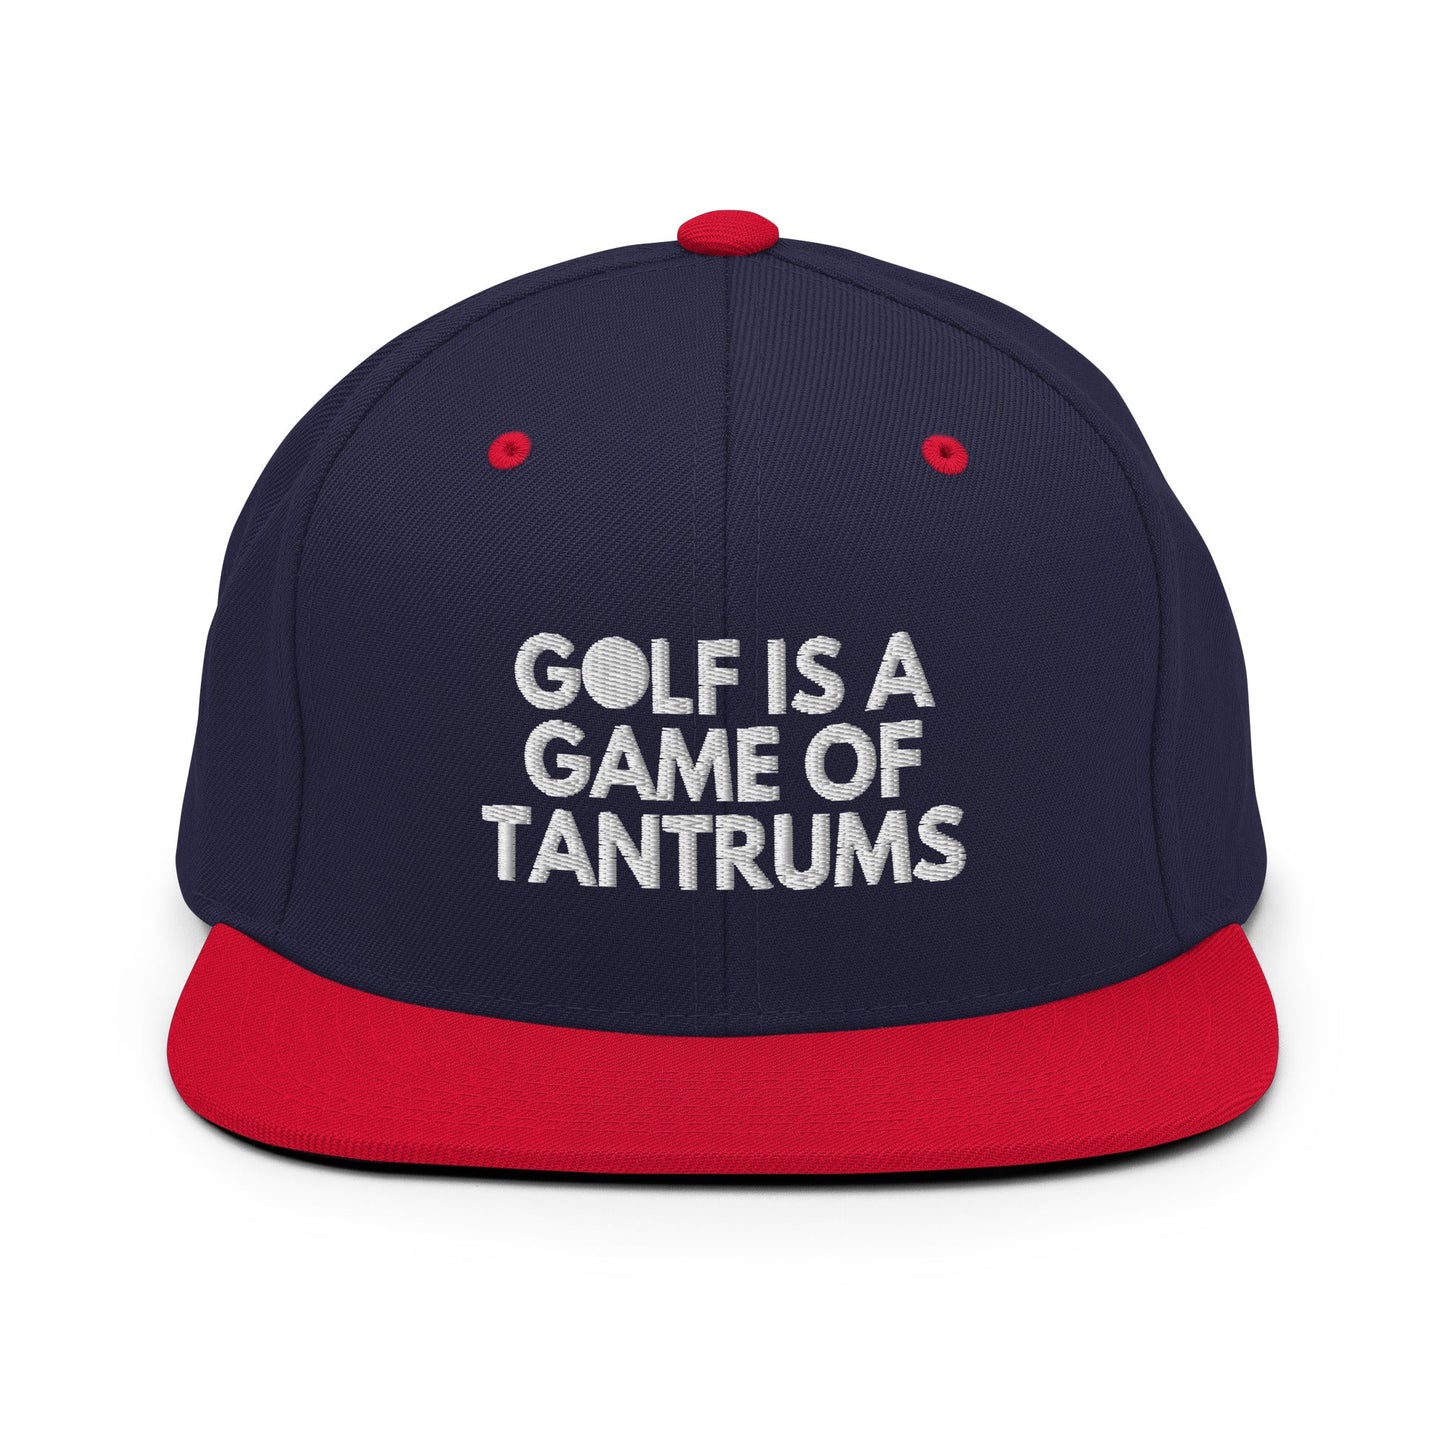 Funny Golfer Gifts  Snapback Hat Navy/ Red Golf Is A Game Of Tantrums Hat Snapback Hat